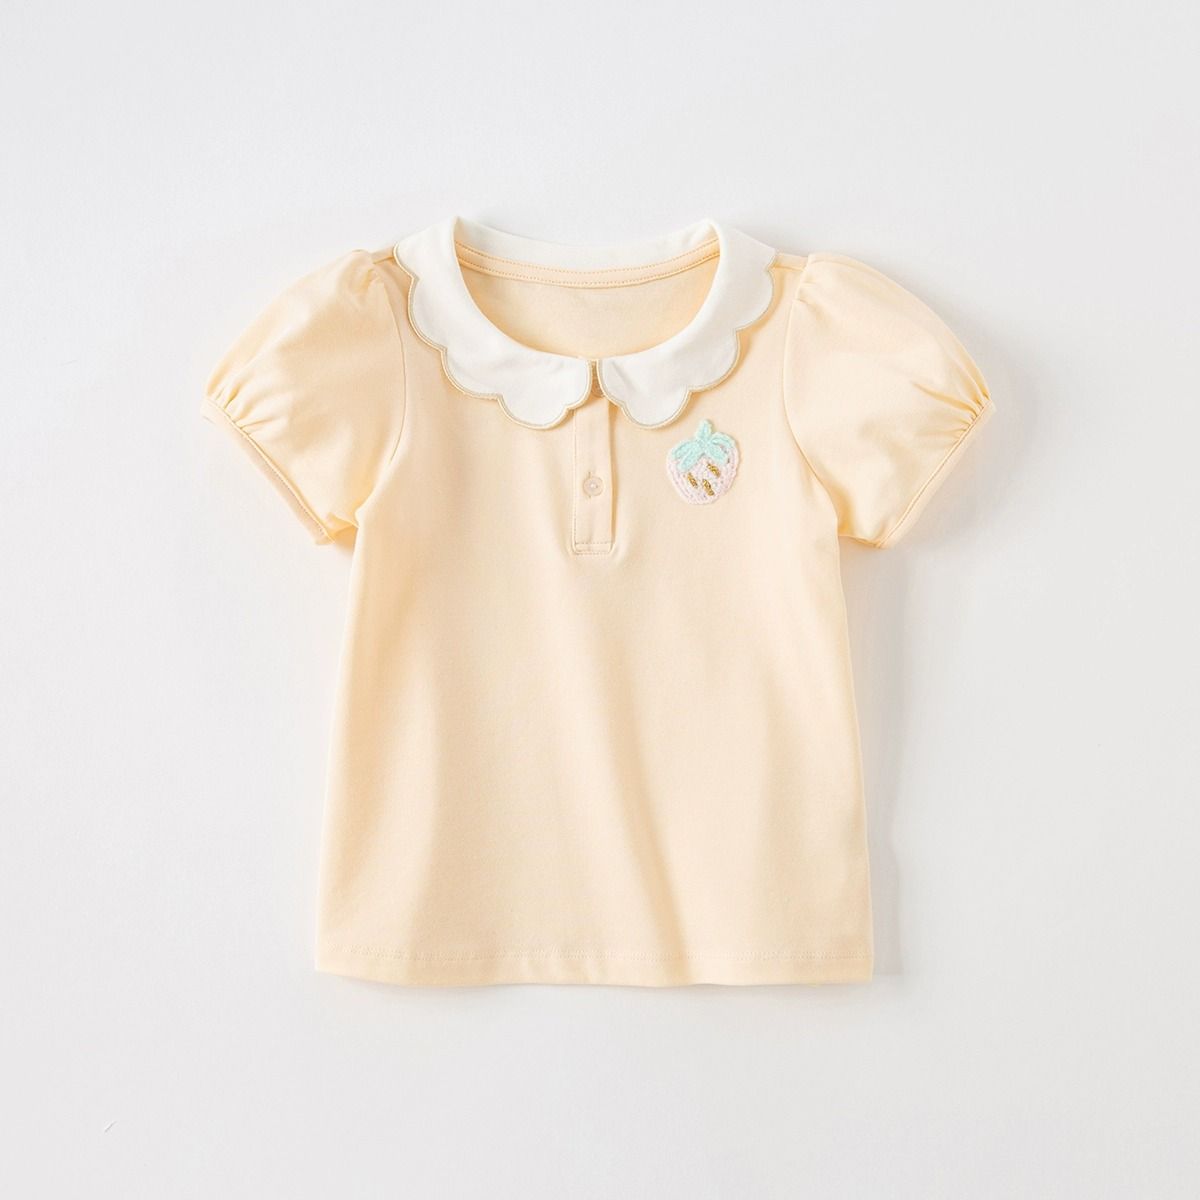 Children's T-shirt  summer new style girls POLO shirt for small and medium-sized children baby doll collar fashionable thin top 1-3 years old